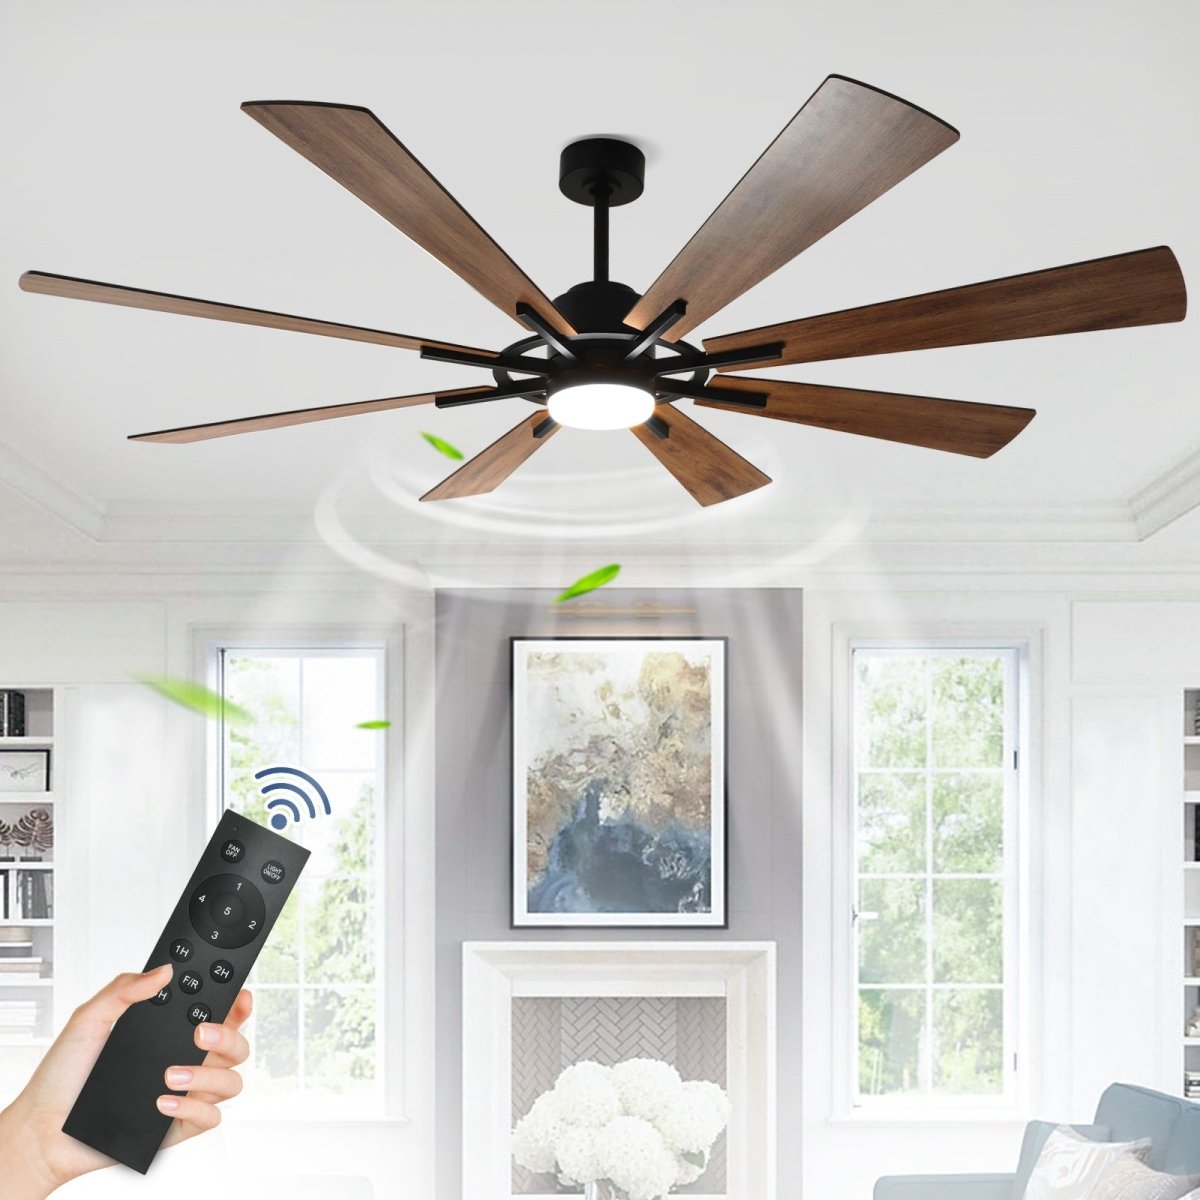 Depuley 72" DC Ceiling Fan with Lights Remote Control, Large Modern Black LED Ceiling Fans, 3-Color Reversible 8 Blades 5 Speed Quiet Motor for Living Room, Patio Hall, Office & Covered Outdoor, Timer - WS-FPZ45-18C-BR 1 | DEPULEY